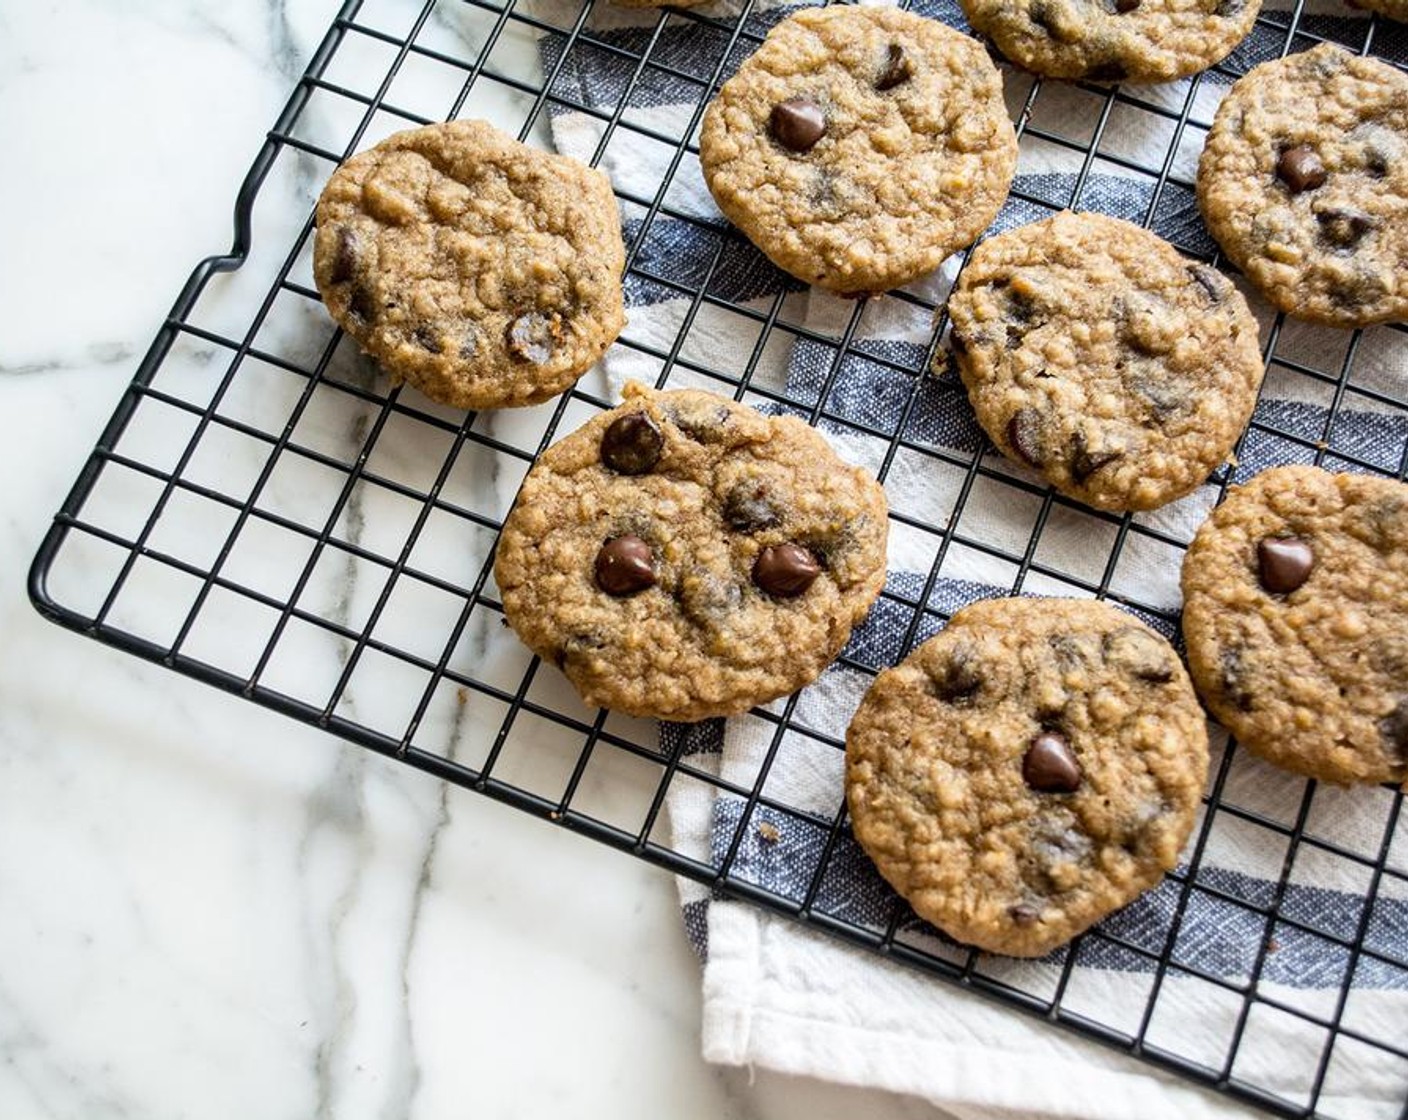 Gluten-Free Peanut Butter Banana and Chocolate Chip Cookies